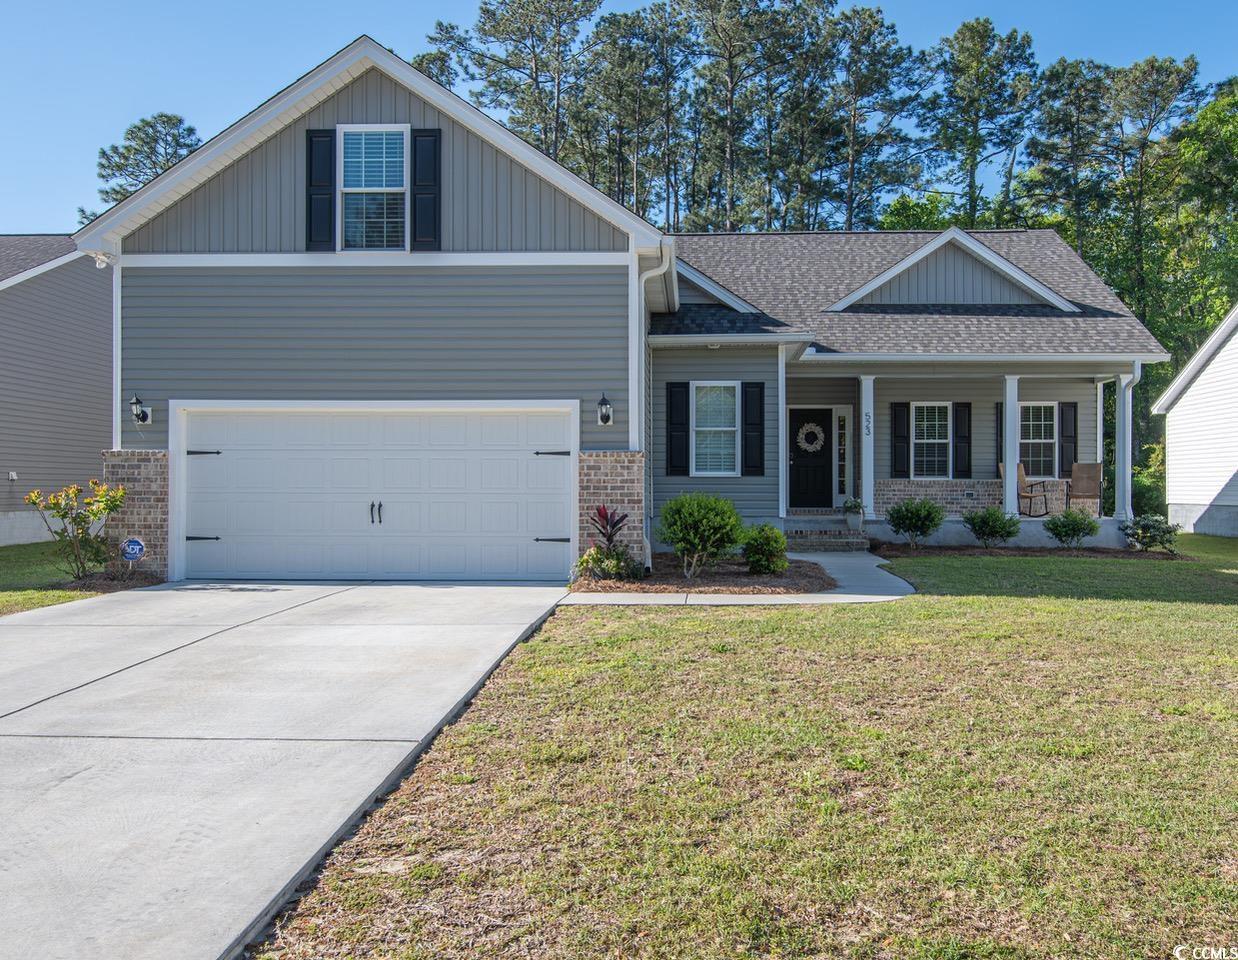 updated photos!  meticulously maintained home in a quiet location. just inside of harbor club on winyah bay. the dogwood plan is a 1 1/2 level home, 4br 3 bath, with a 2-car garage. this open floor plan features a spacious kitchen overlooking the great room. enjoy a beautiful view of the spectacular oak trees and azaleas from the front and the winyah bay from the back porch. relax on the screened in porch overlooking a nice sized back yard, bordered in the rear with pines for privacy. you can even watch the shrimp boats on the waterway from the backporch! neutral colors throughout and luxury vinyl flooring throughout the downstairs.